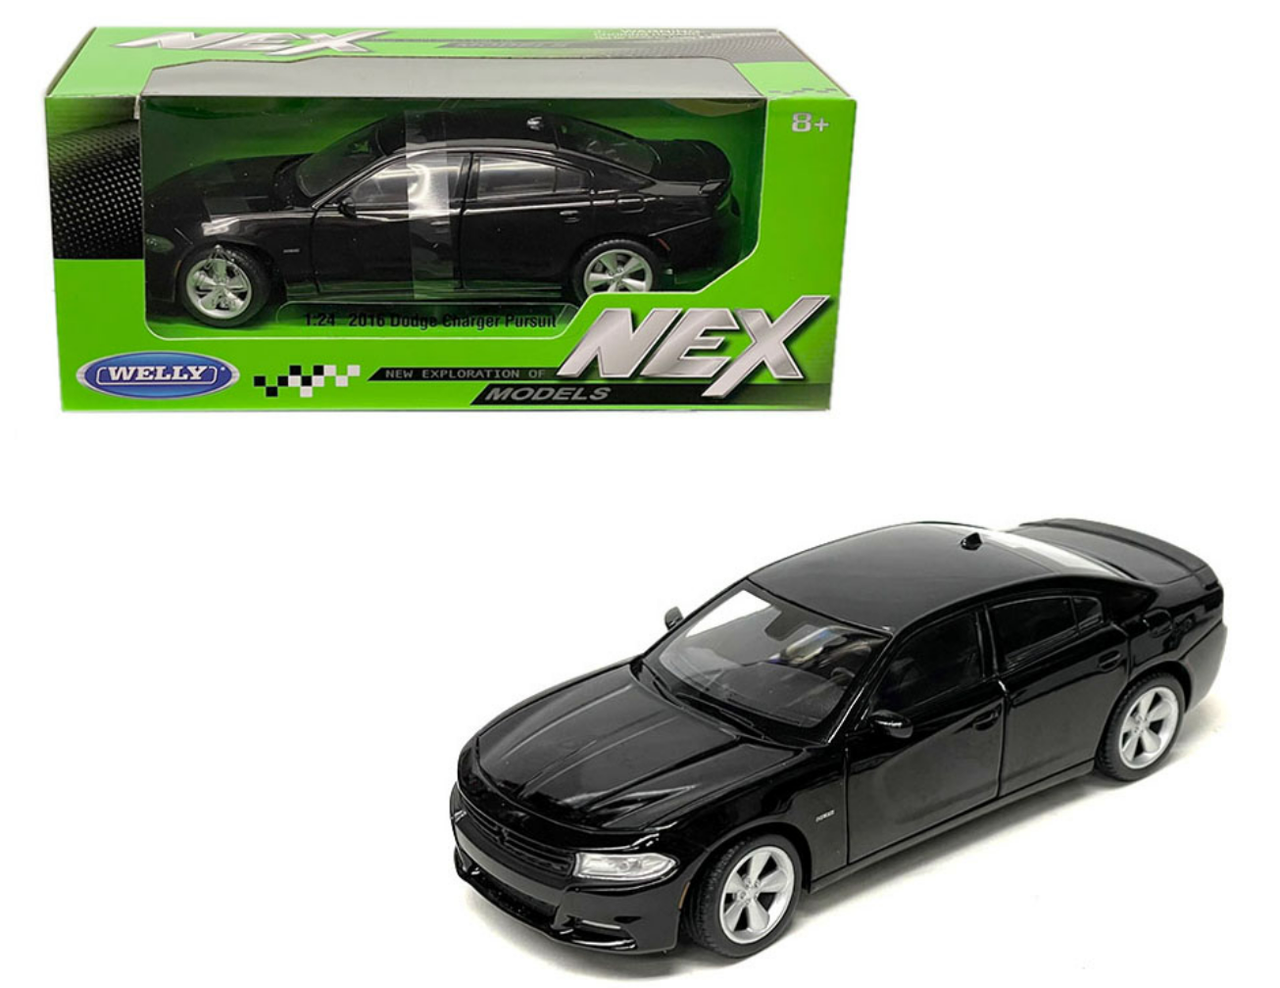 1/24 Welly Dodge Charger R/T (Black) Diecast Car Model